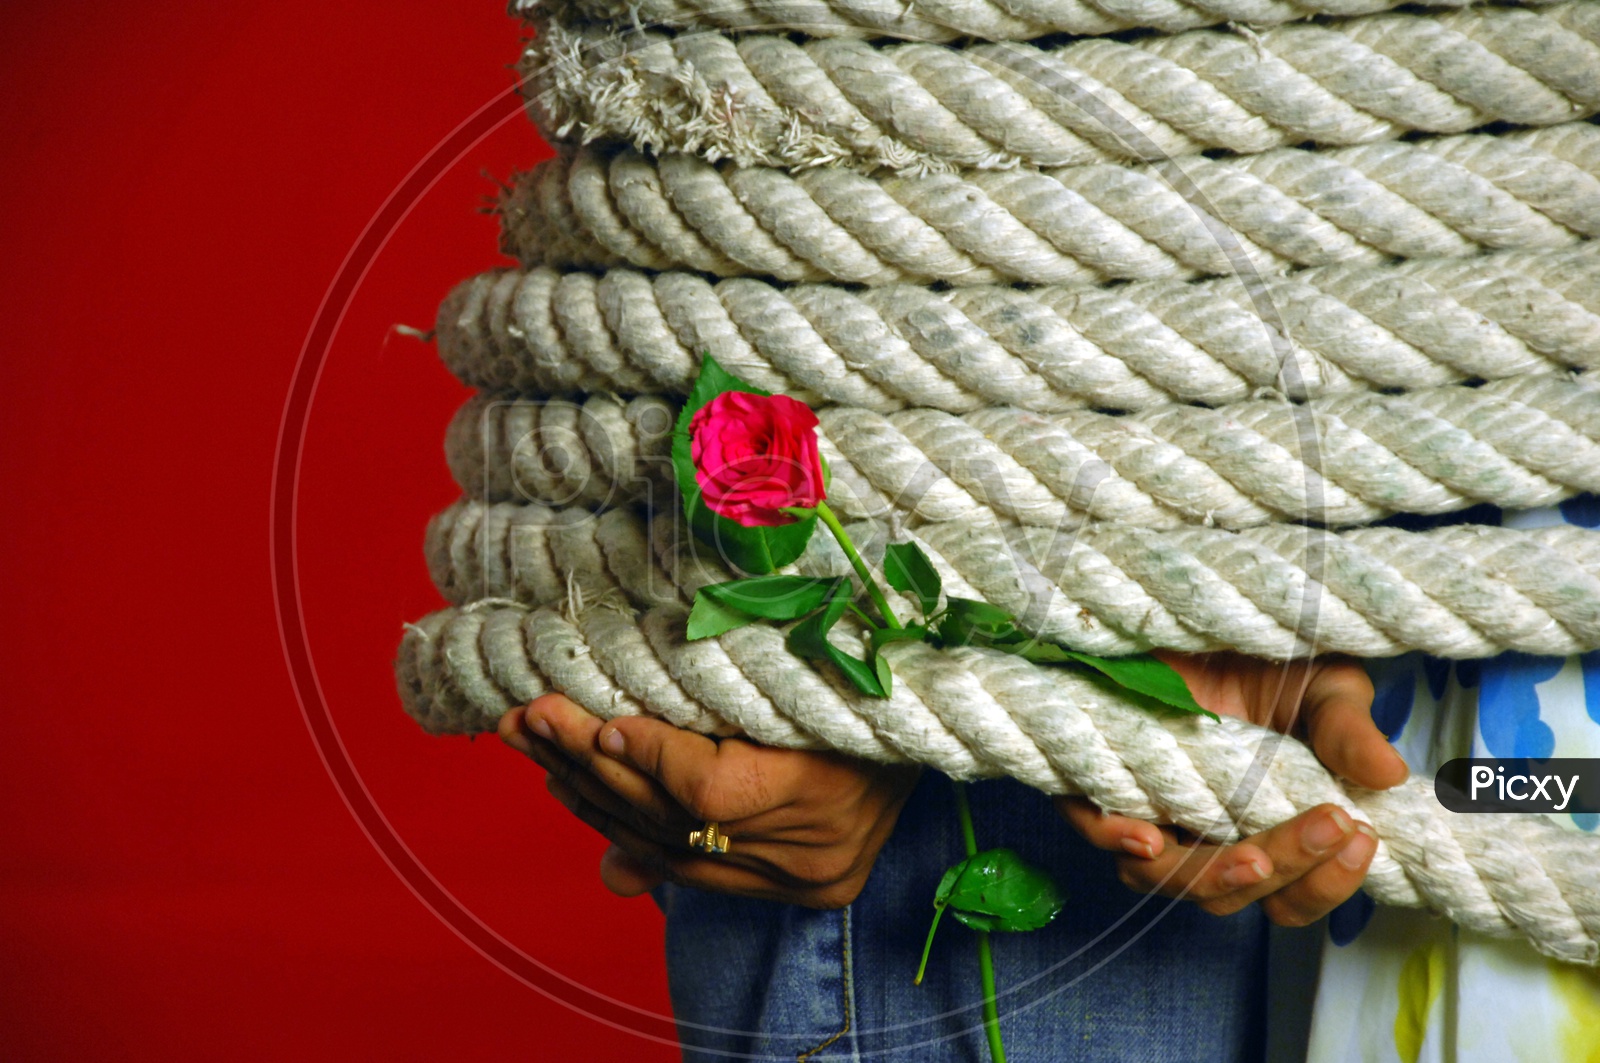 Lovers Or Couple Tied With a Rope With Rose Flower In Their Hand